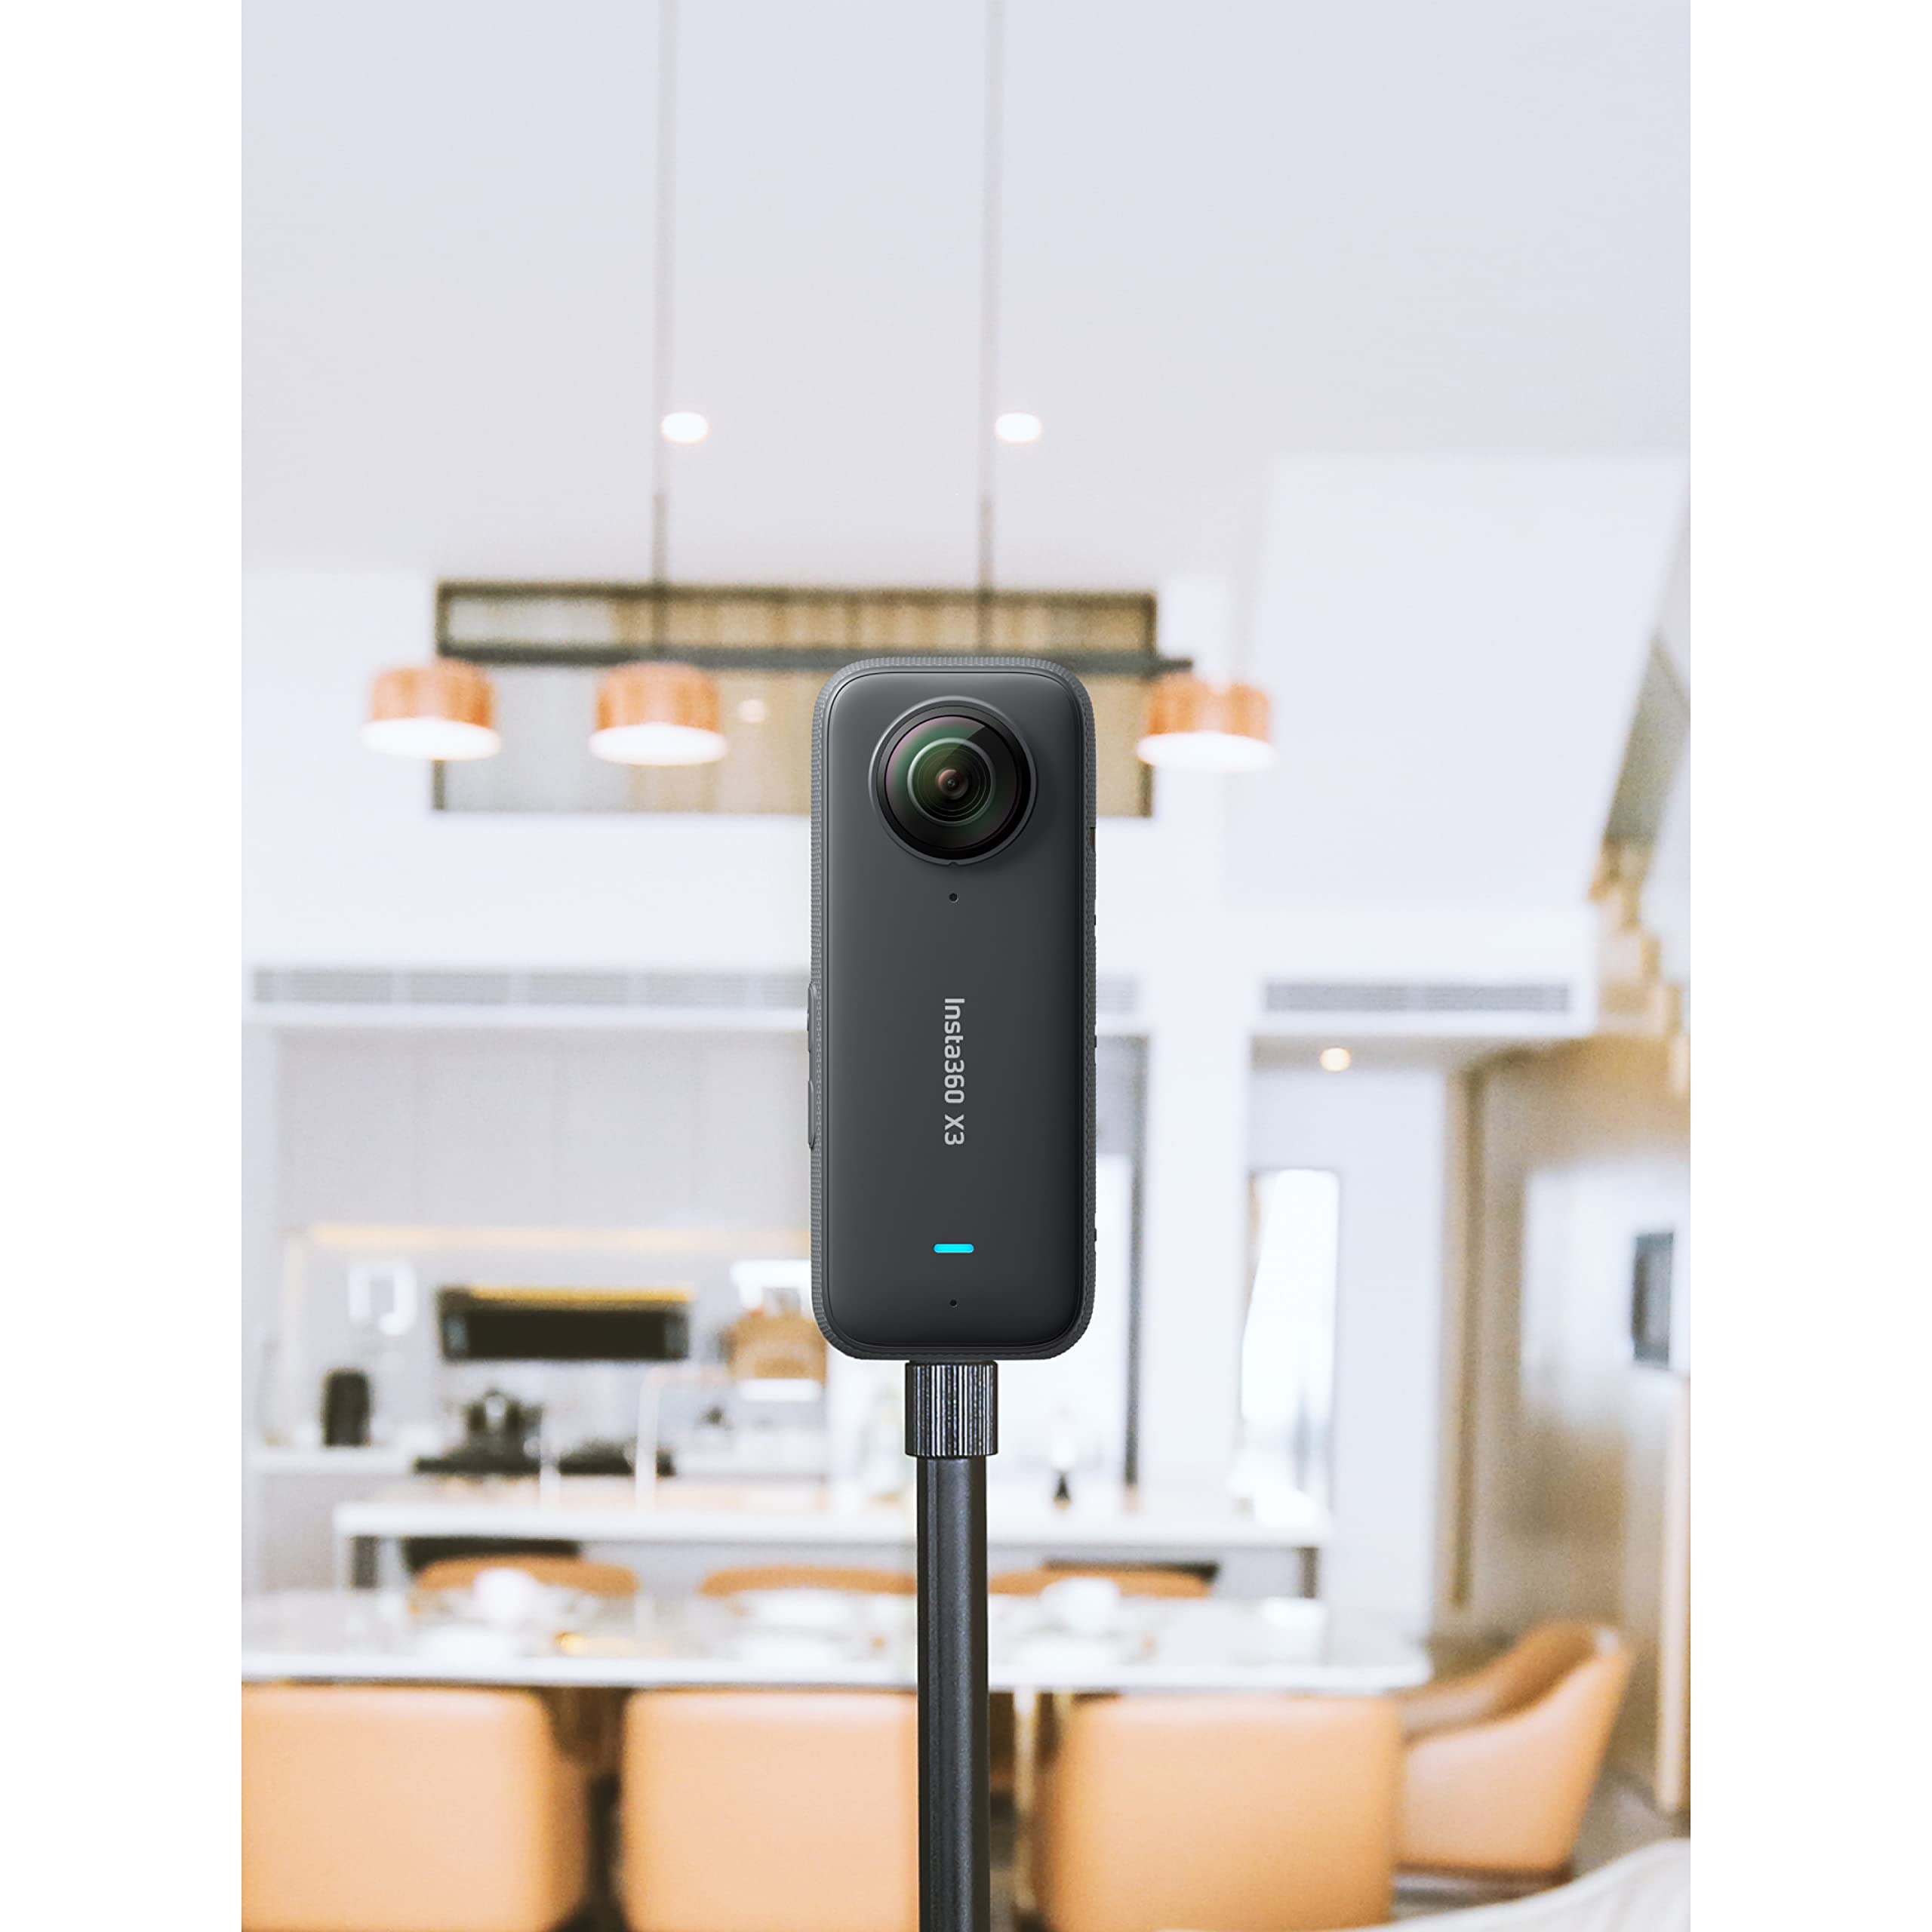 Insta360 X3 Virtual Tour Kit - 360 Virtual Tour Camera, 72MP Photo, 5.7K 360 Active HDR Video, Top Stabilization, Long-Life Replaceable Battery, Great Low Light Performance, WiFi Preview & Transfer